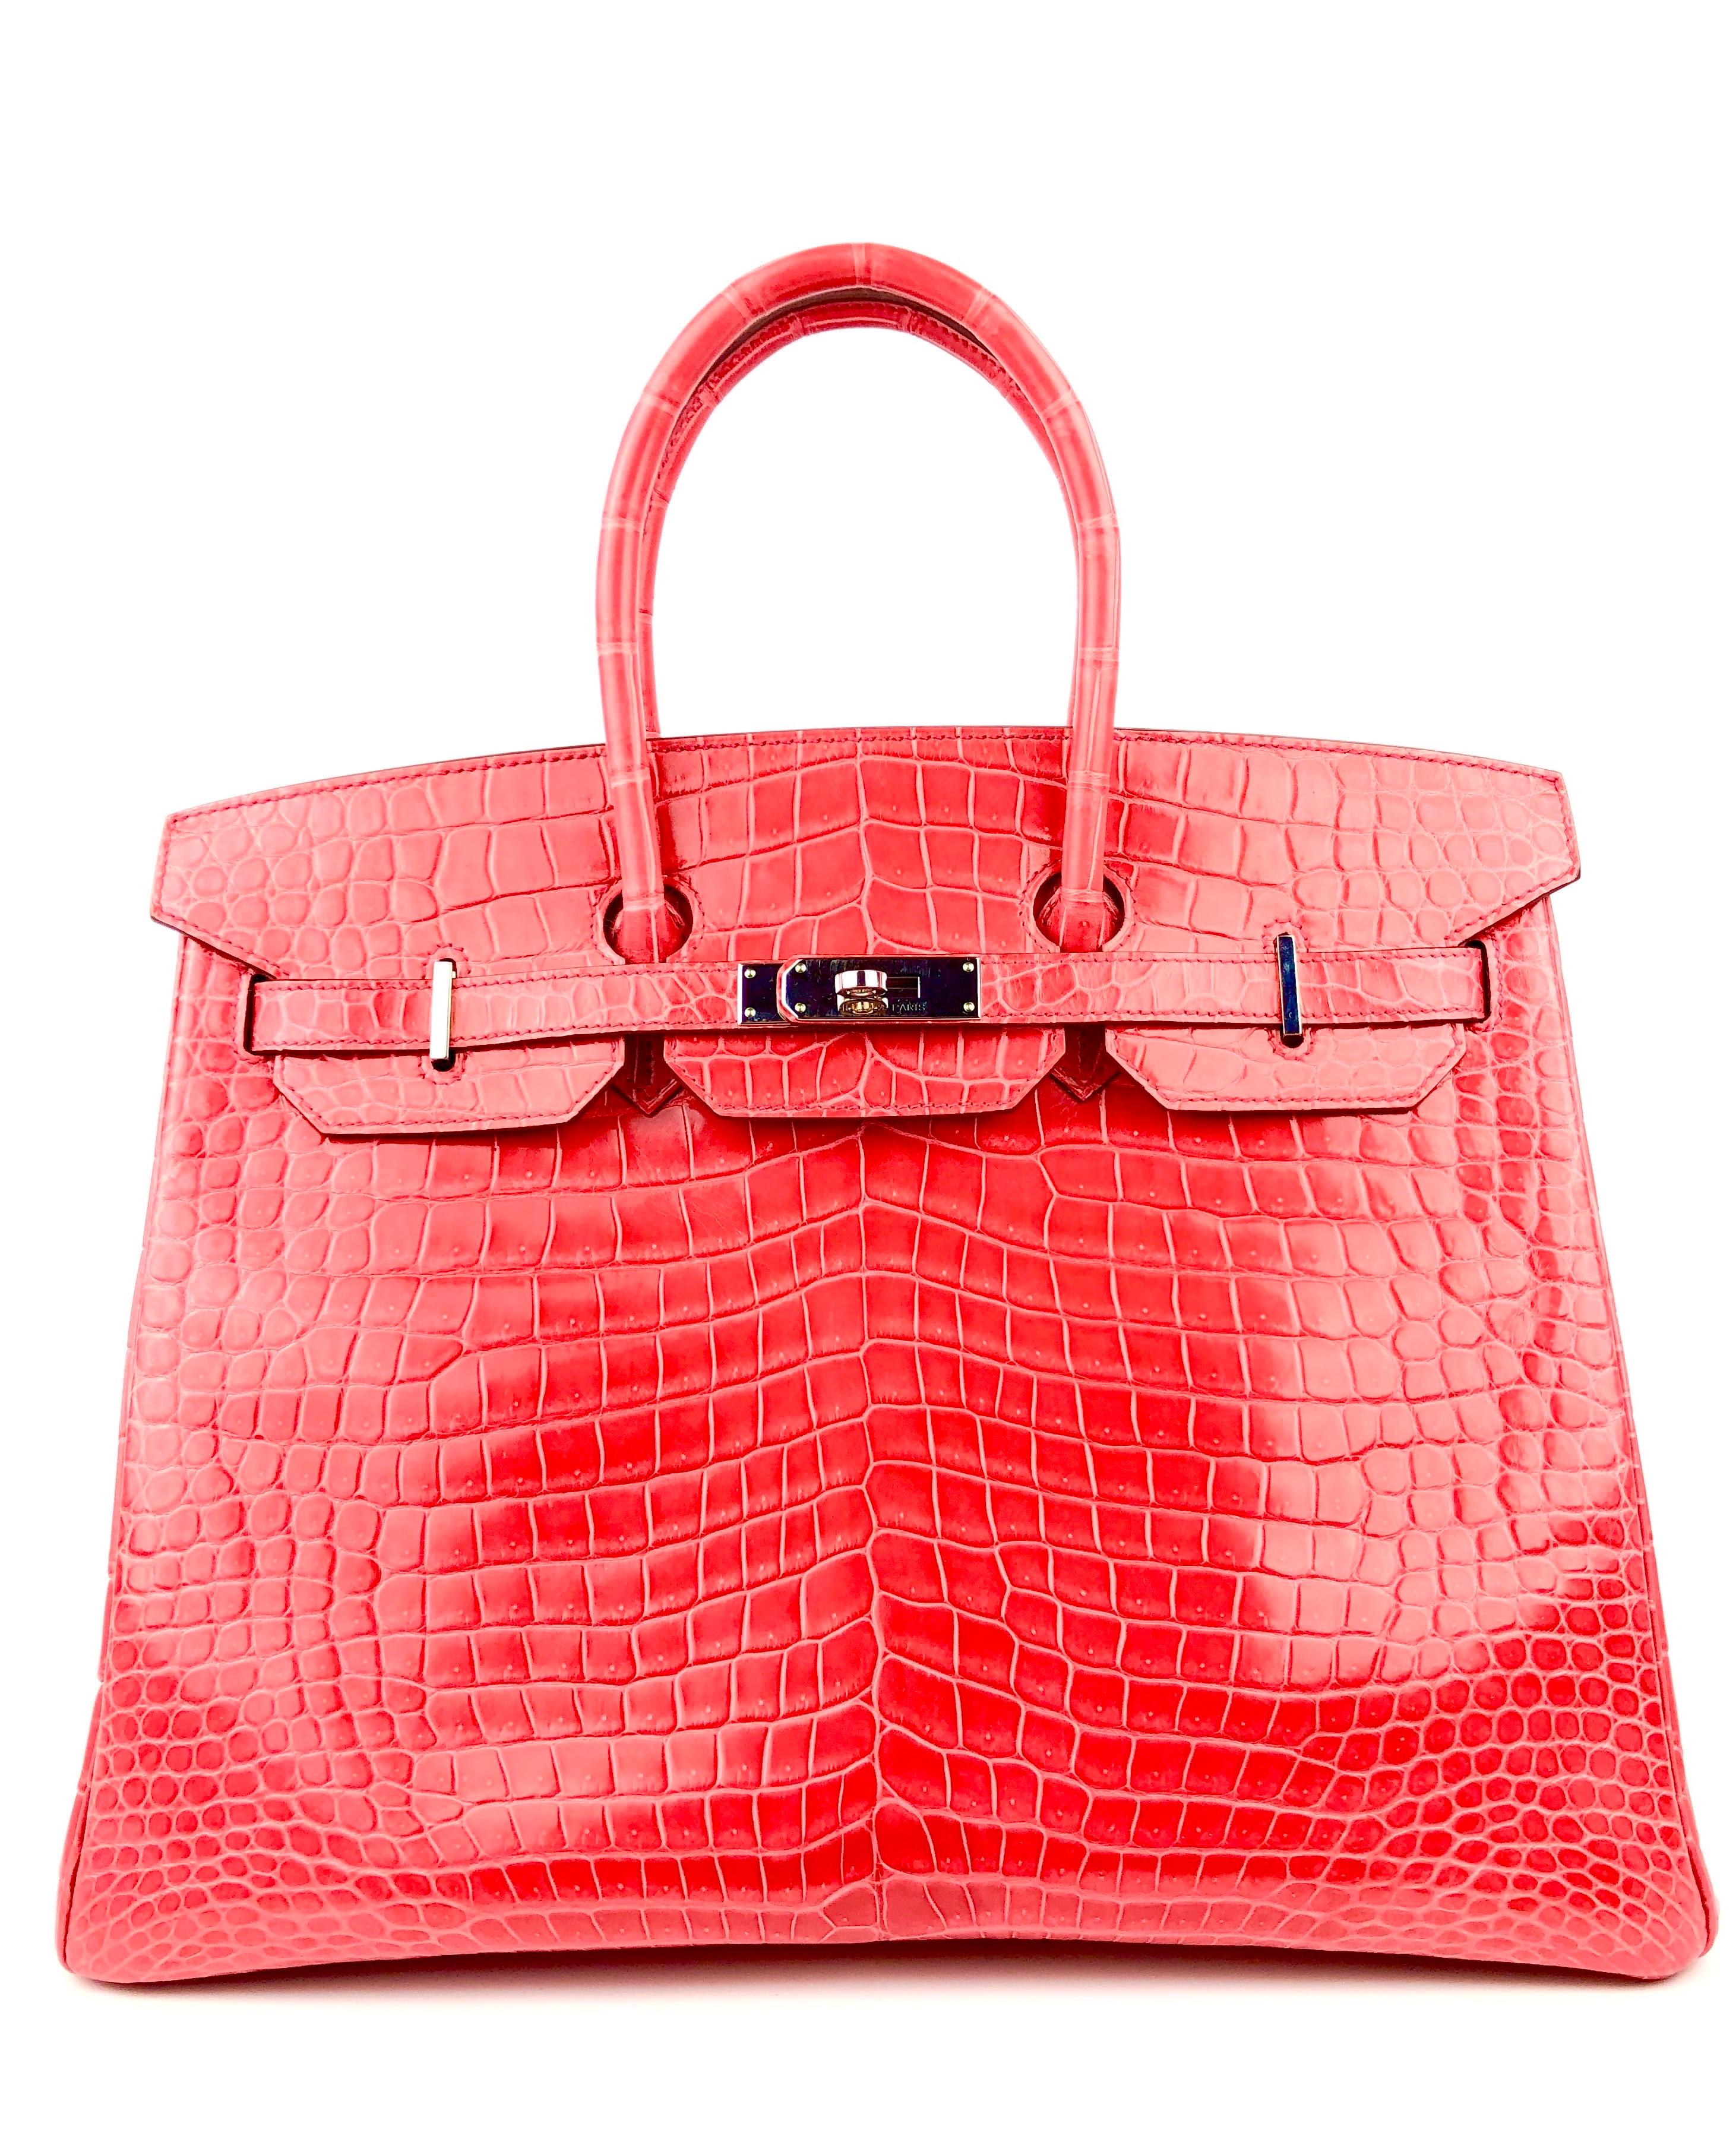 Stunning 2016 X Stamp Hermes Birkin 35 Bougainvillea Red Pink Crocodile Palladium Hardware. Excellent Pristine condition, light hairlines on hardware, excellent corners and structure. 

Shop with Confidence from Lux Addicts. Authenticity Guaranteed! 